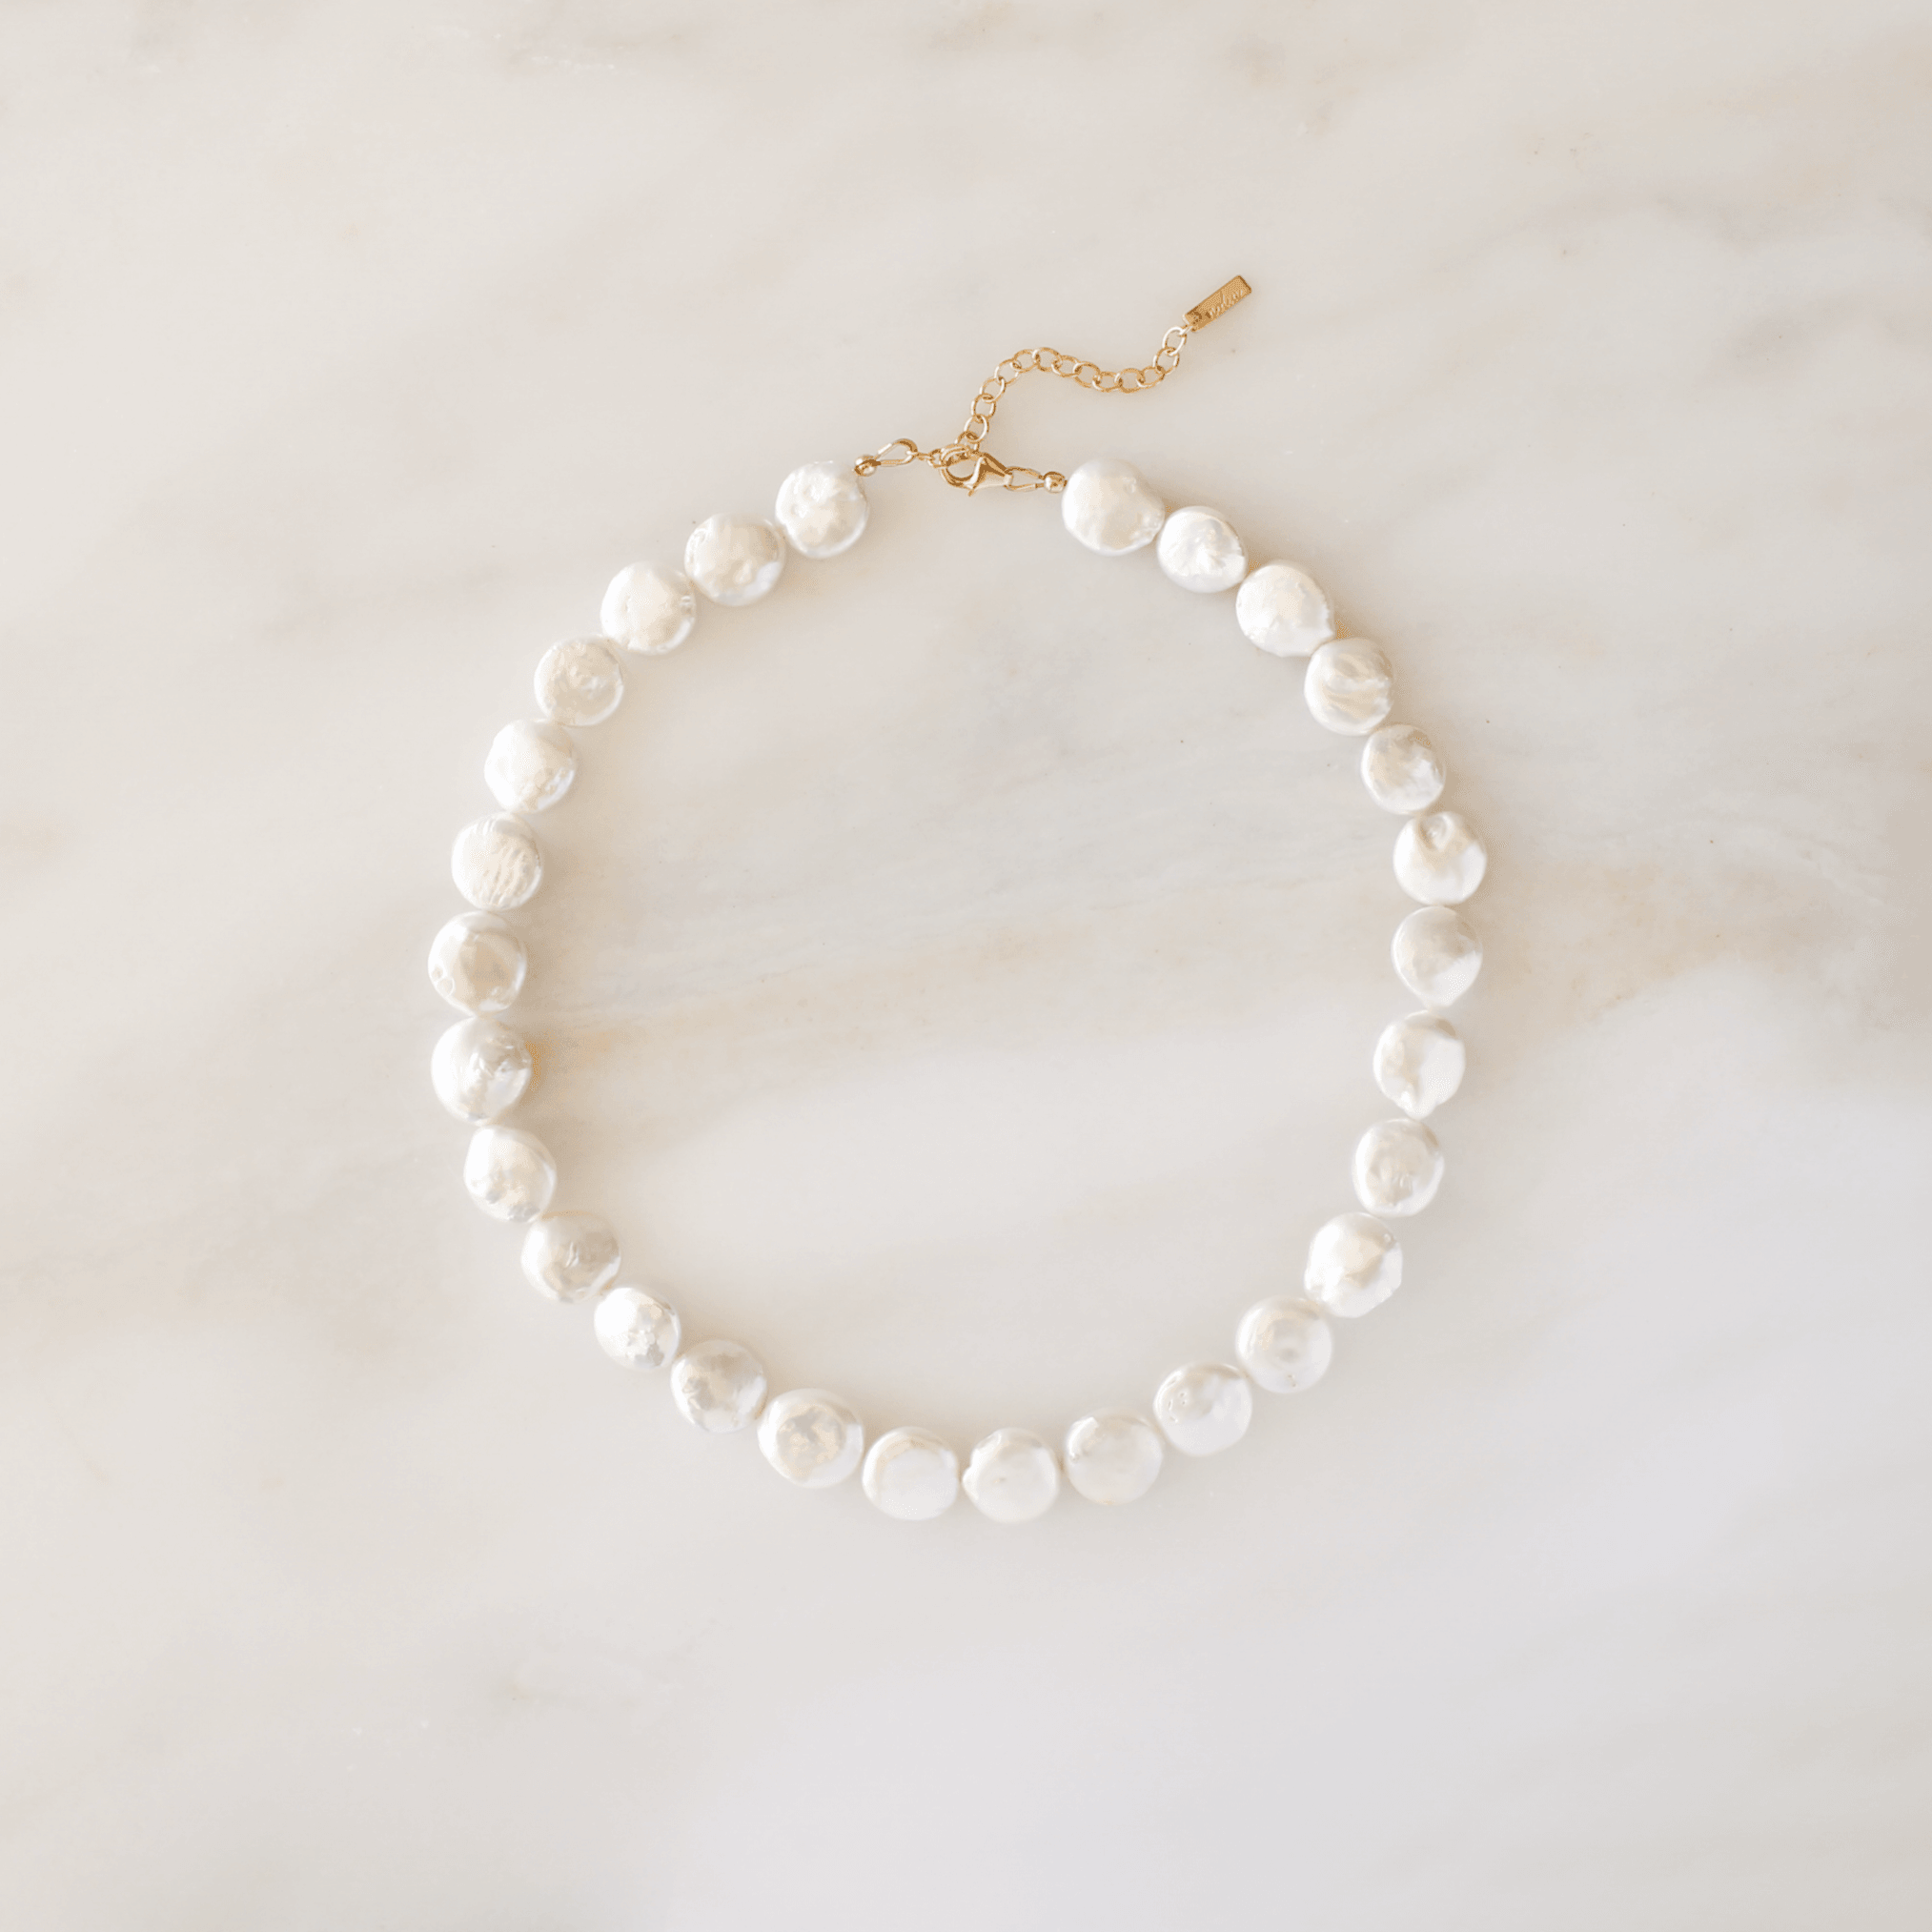 Baroque Misfit Pearl Necklace - Nolia Jewelry - Meaningful + Sustainably Handcrafted Jewelry